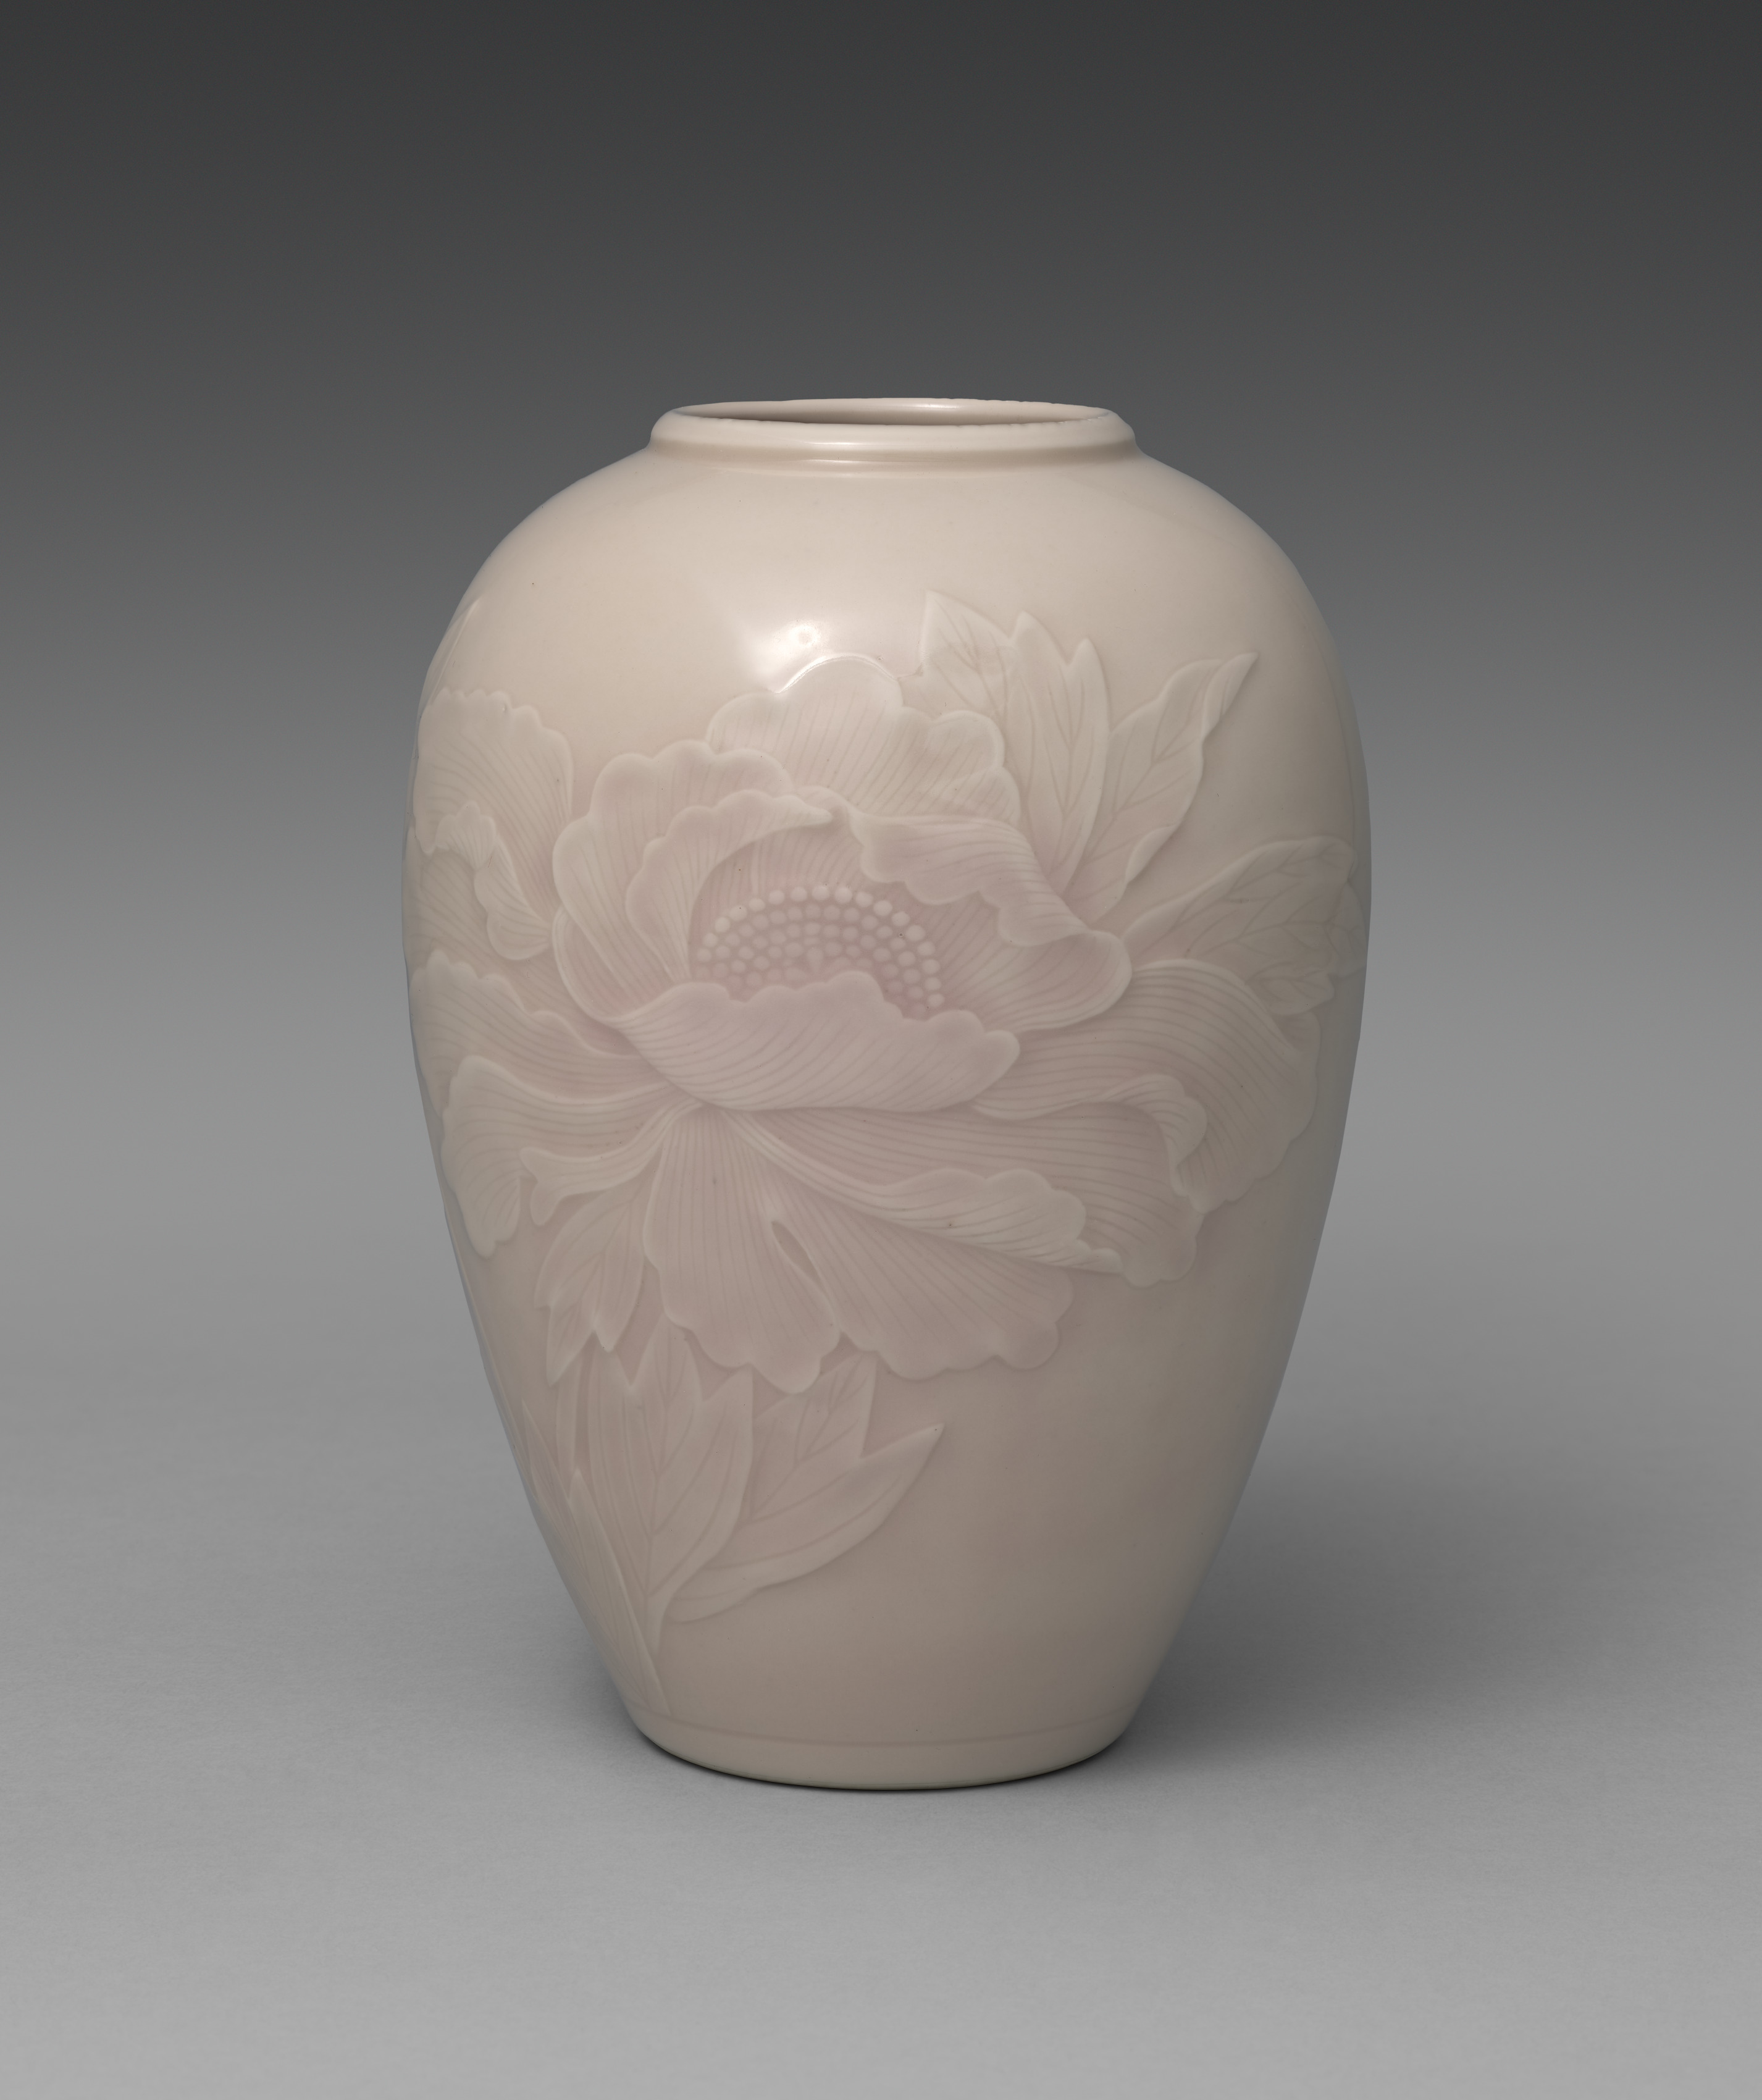 Cleveland Museum of Art Colors of Kyoto exhibit reveals a dynasty of ...